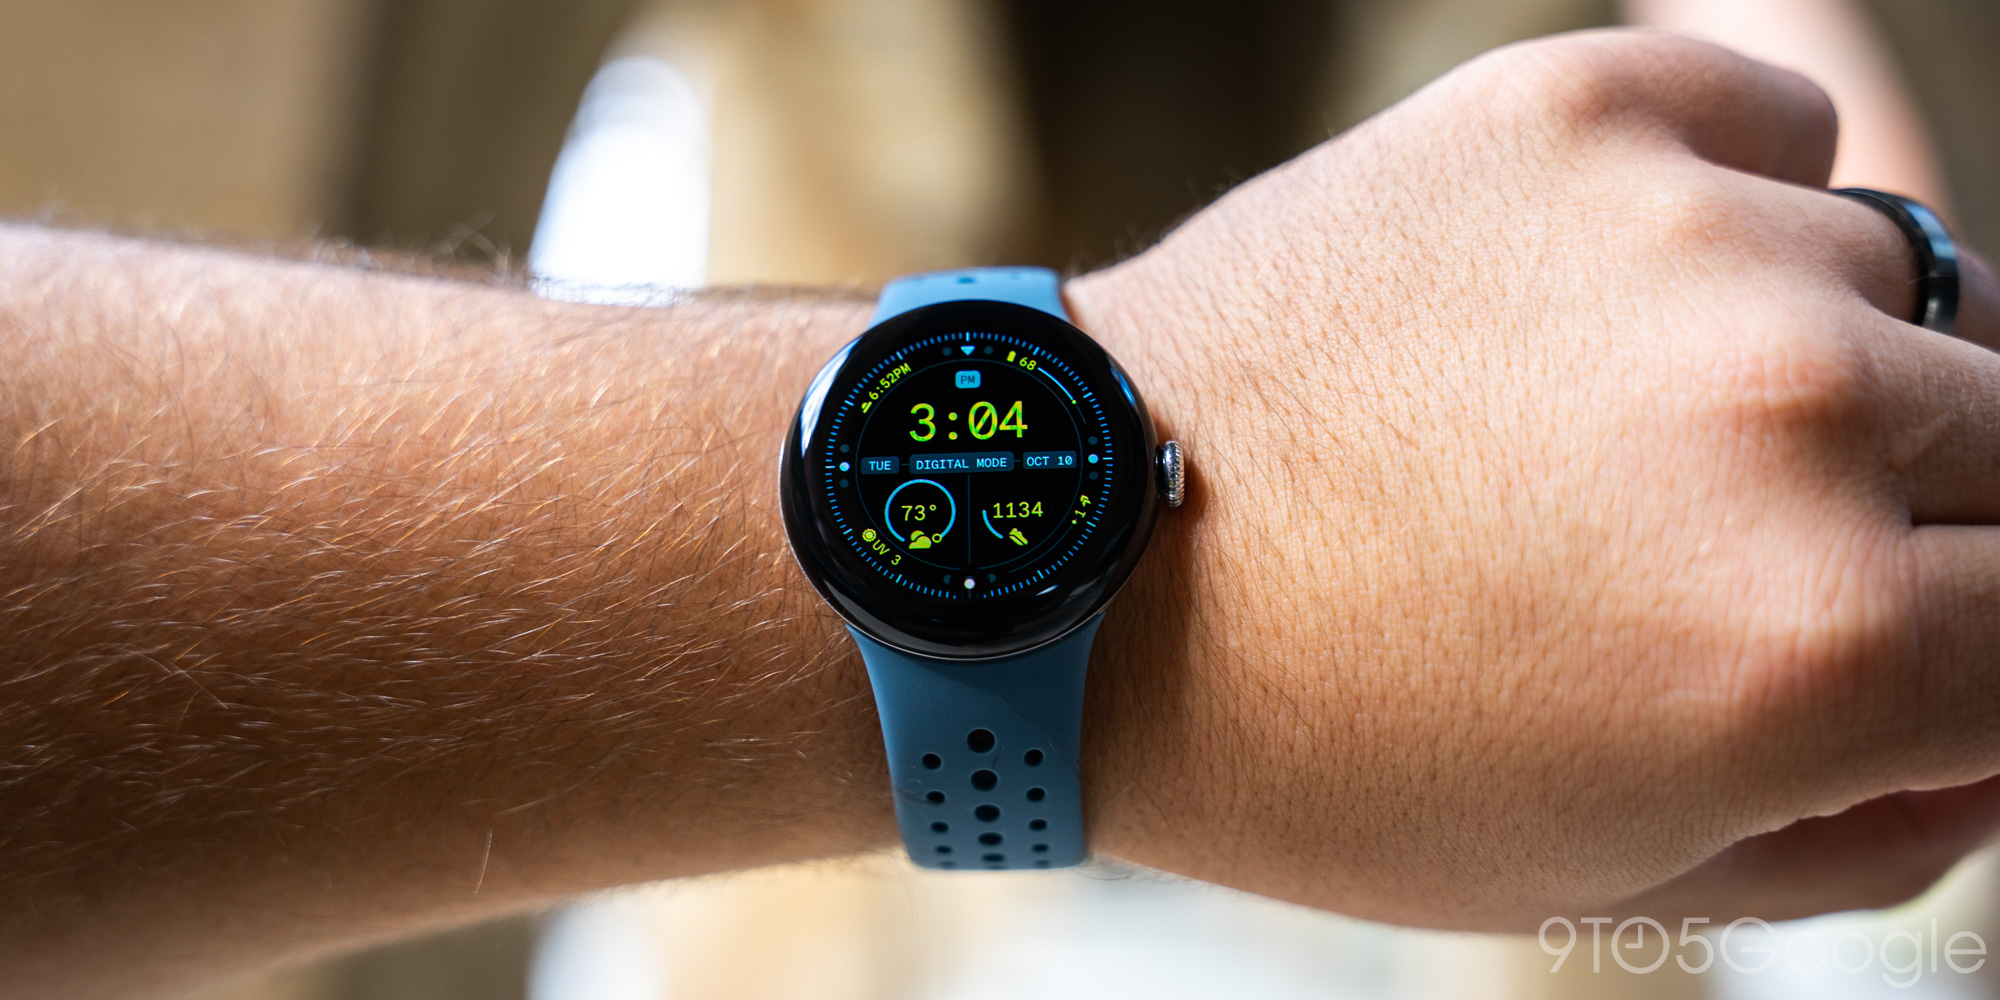 Pixel Watch 2 LTE offer includes two free years of Fi data